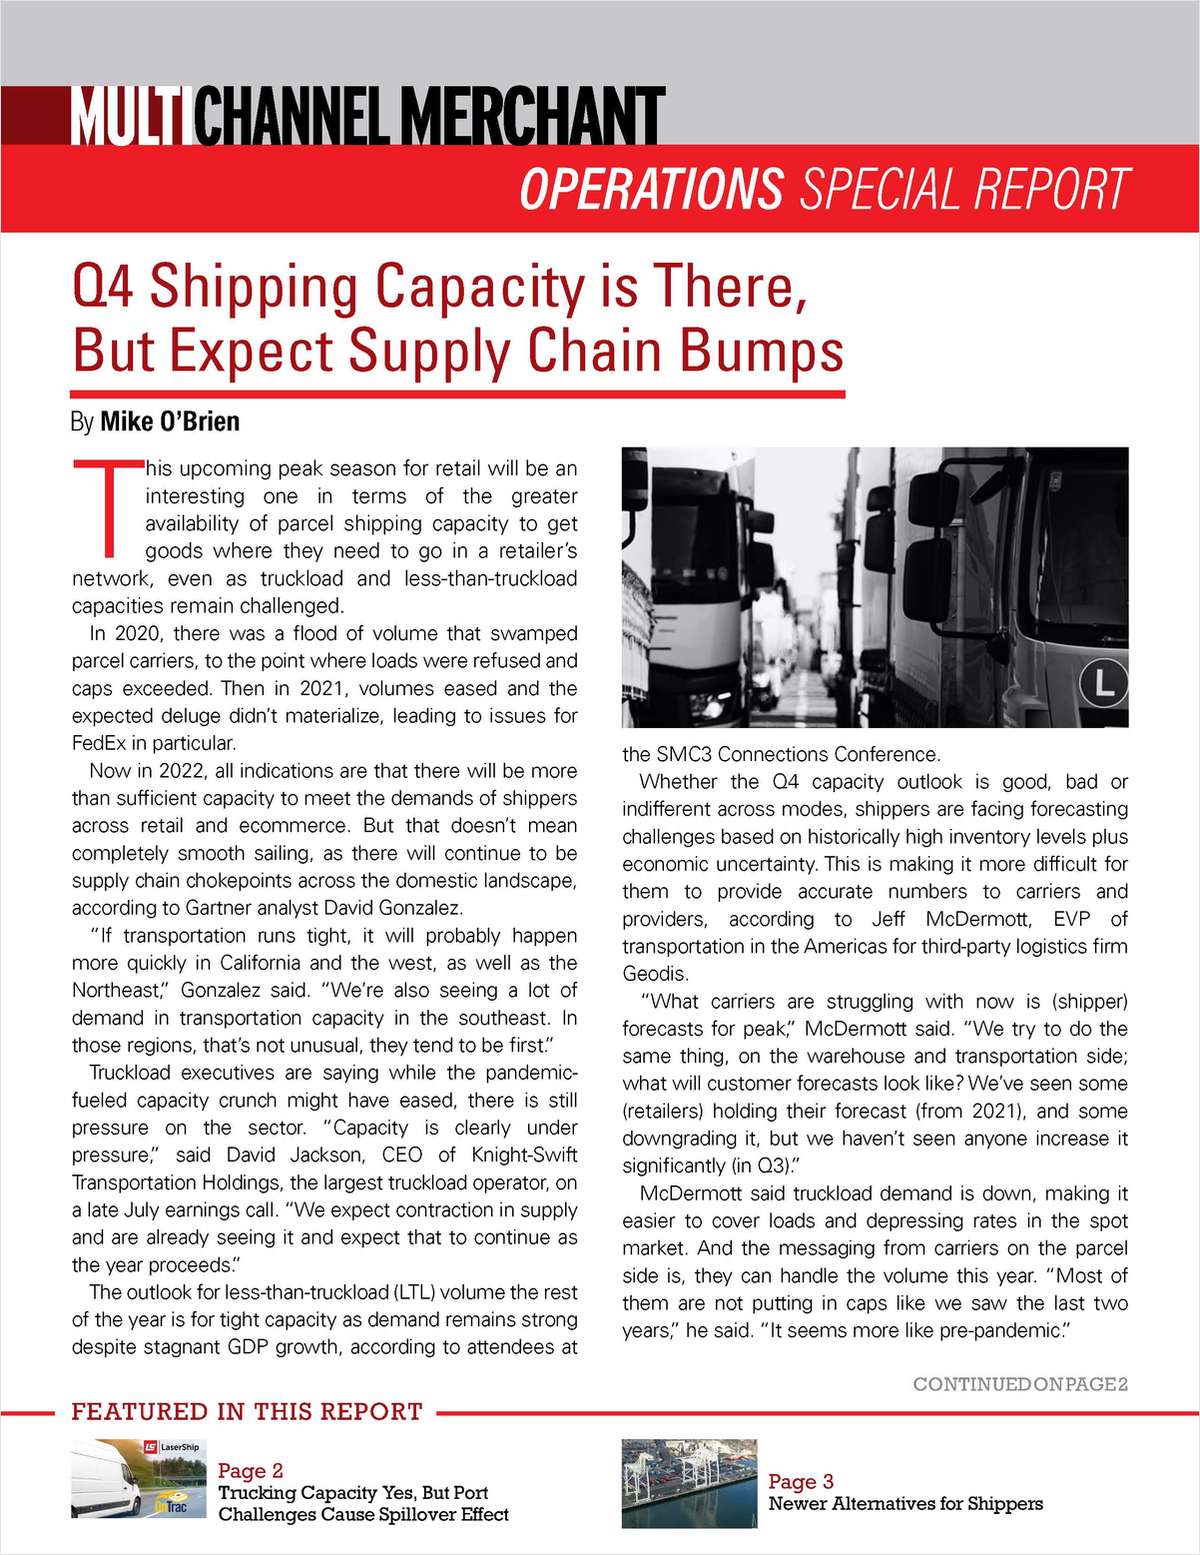 Shipping Capacity Management: The Outlook for 2022 Peak Season